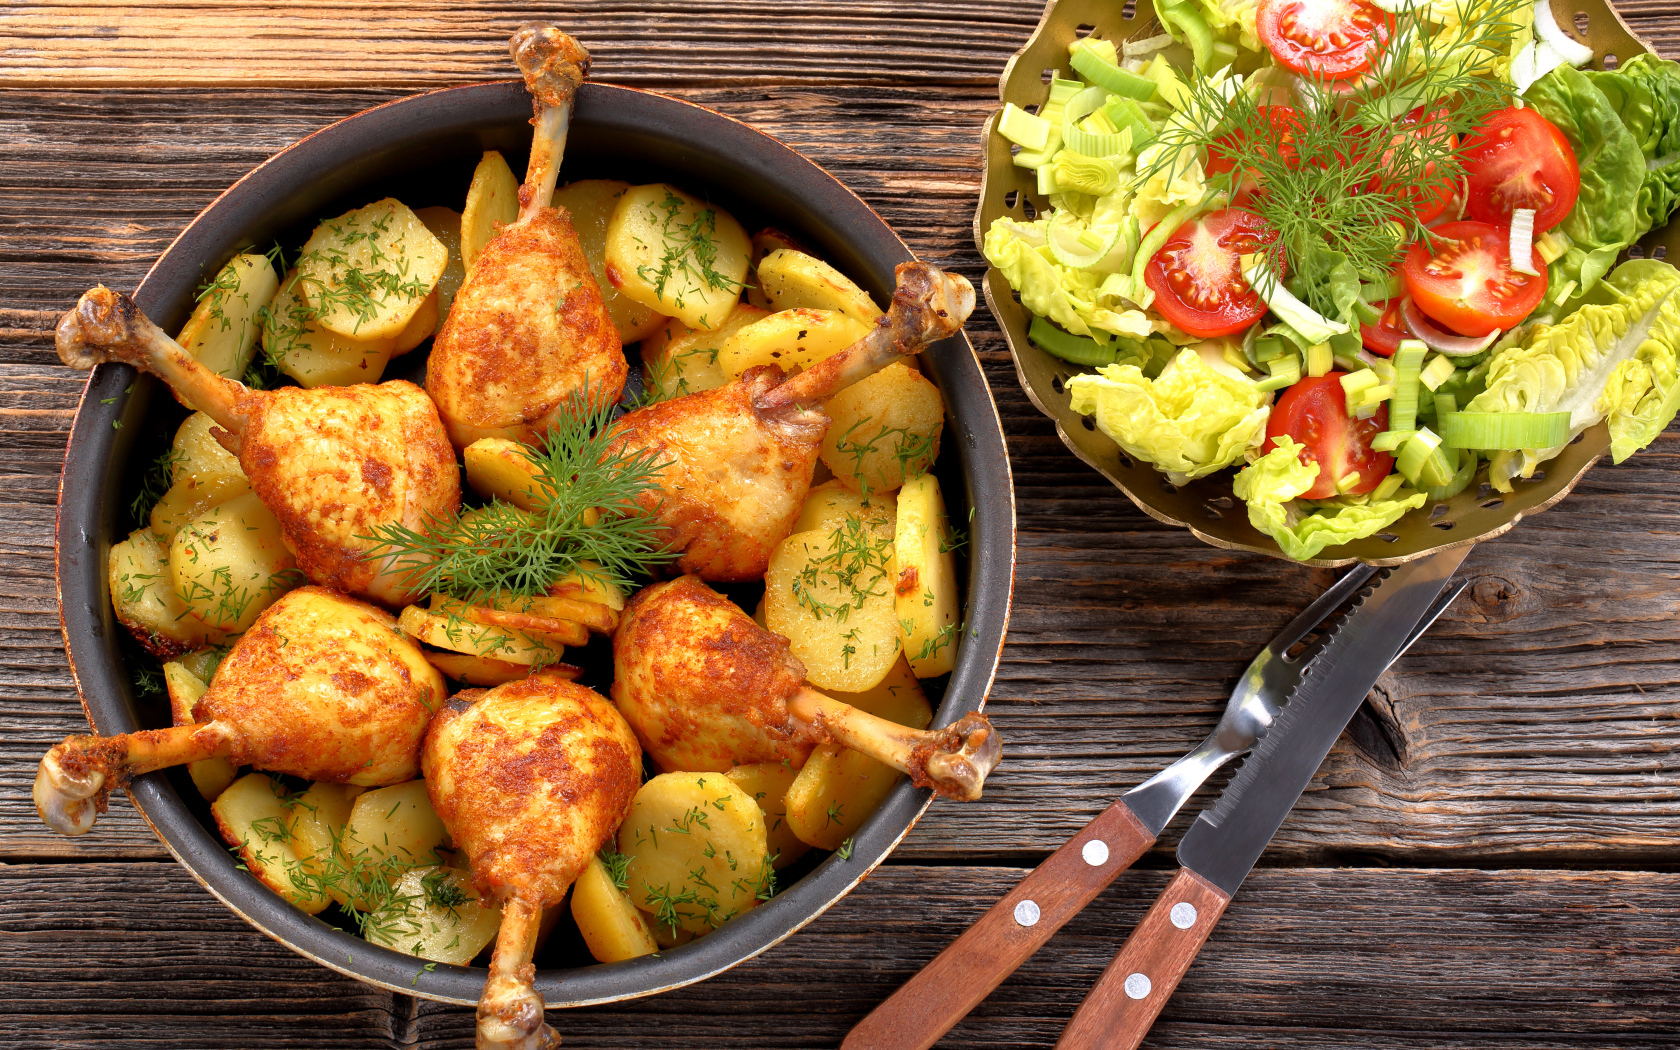 Fried chicken legs with potatoes on a table with salad